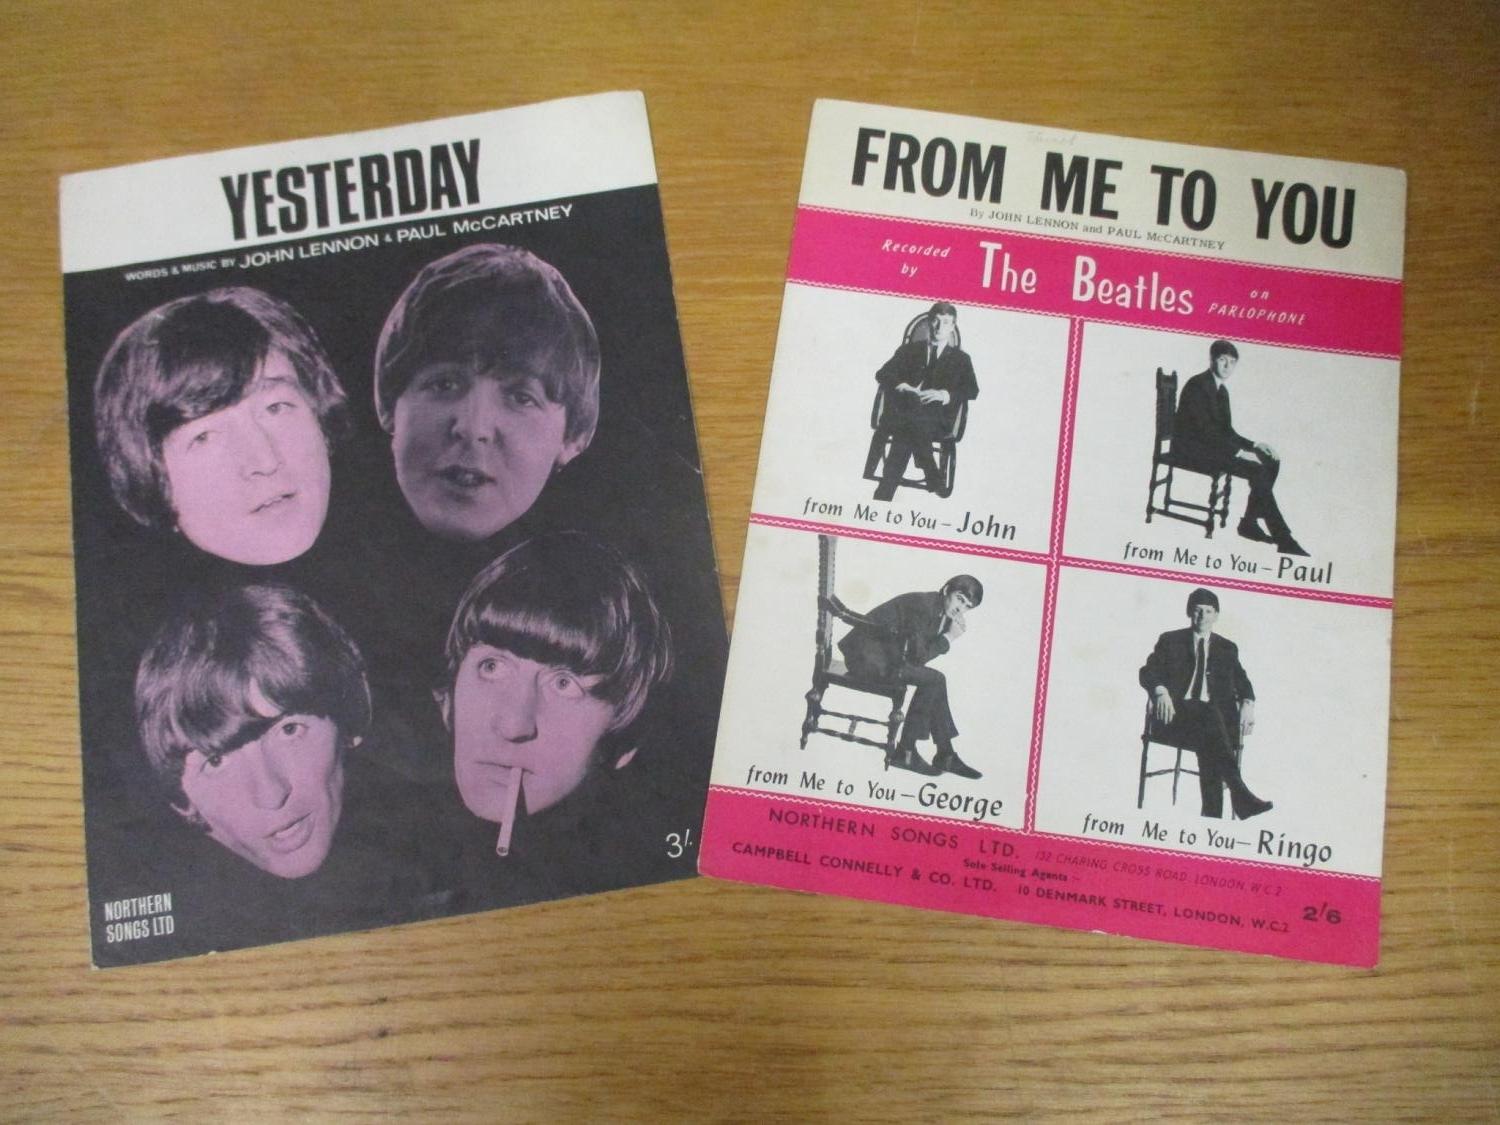 1960s Beatles related music to include words and music to From Me to You and Yesterday